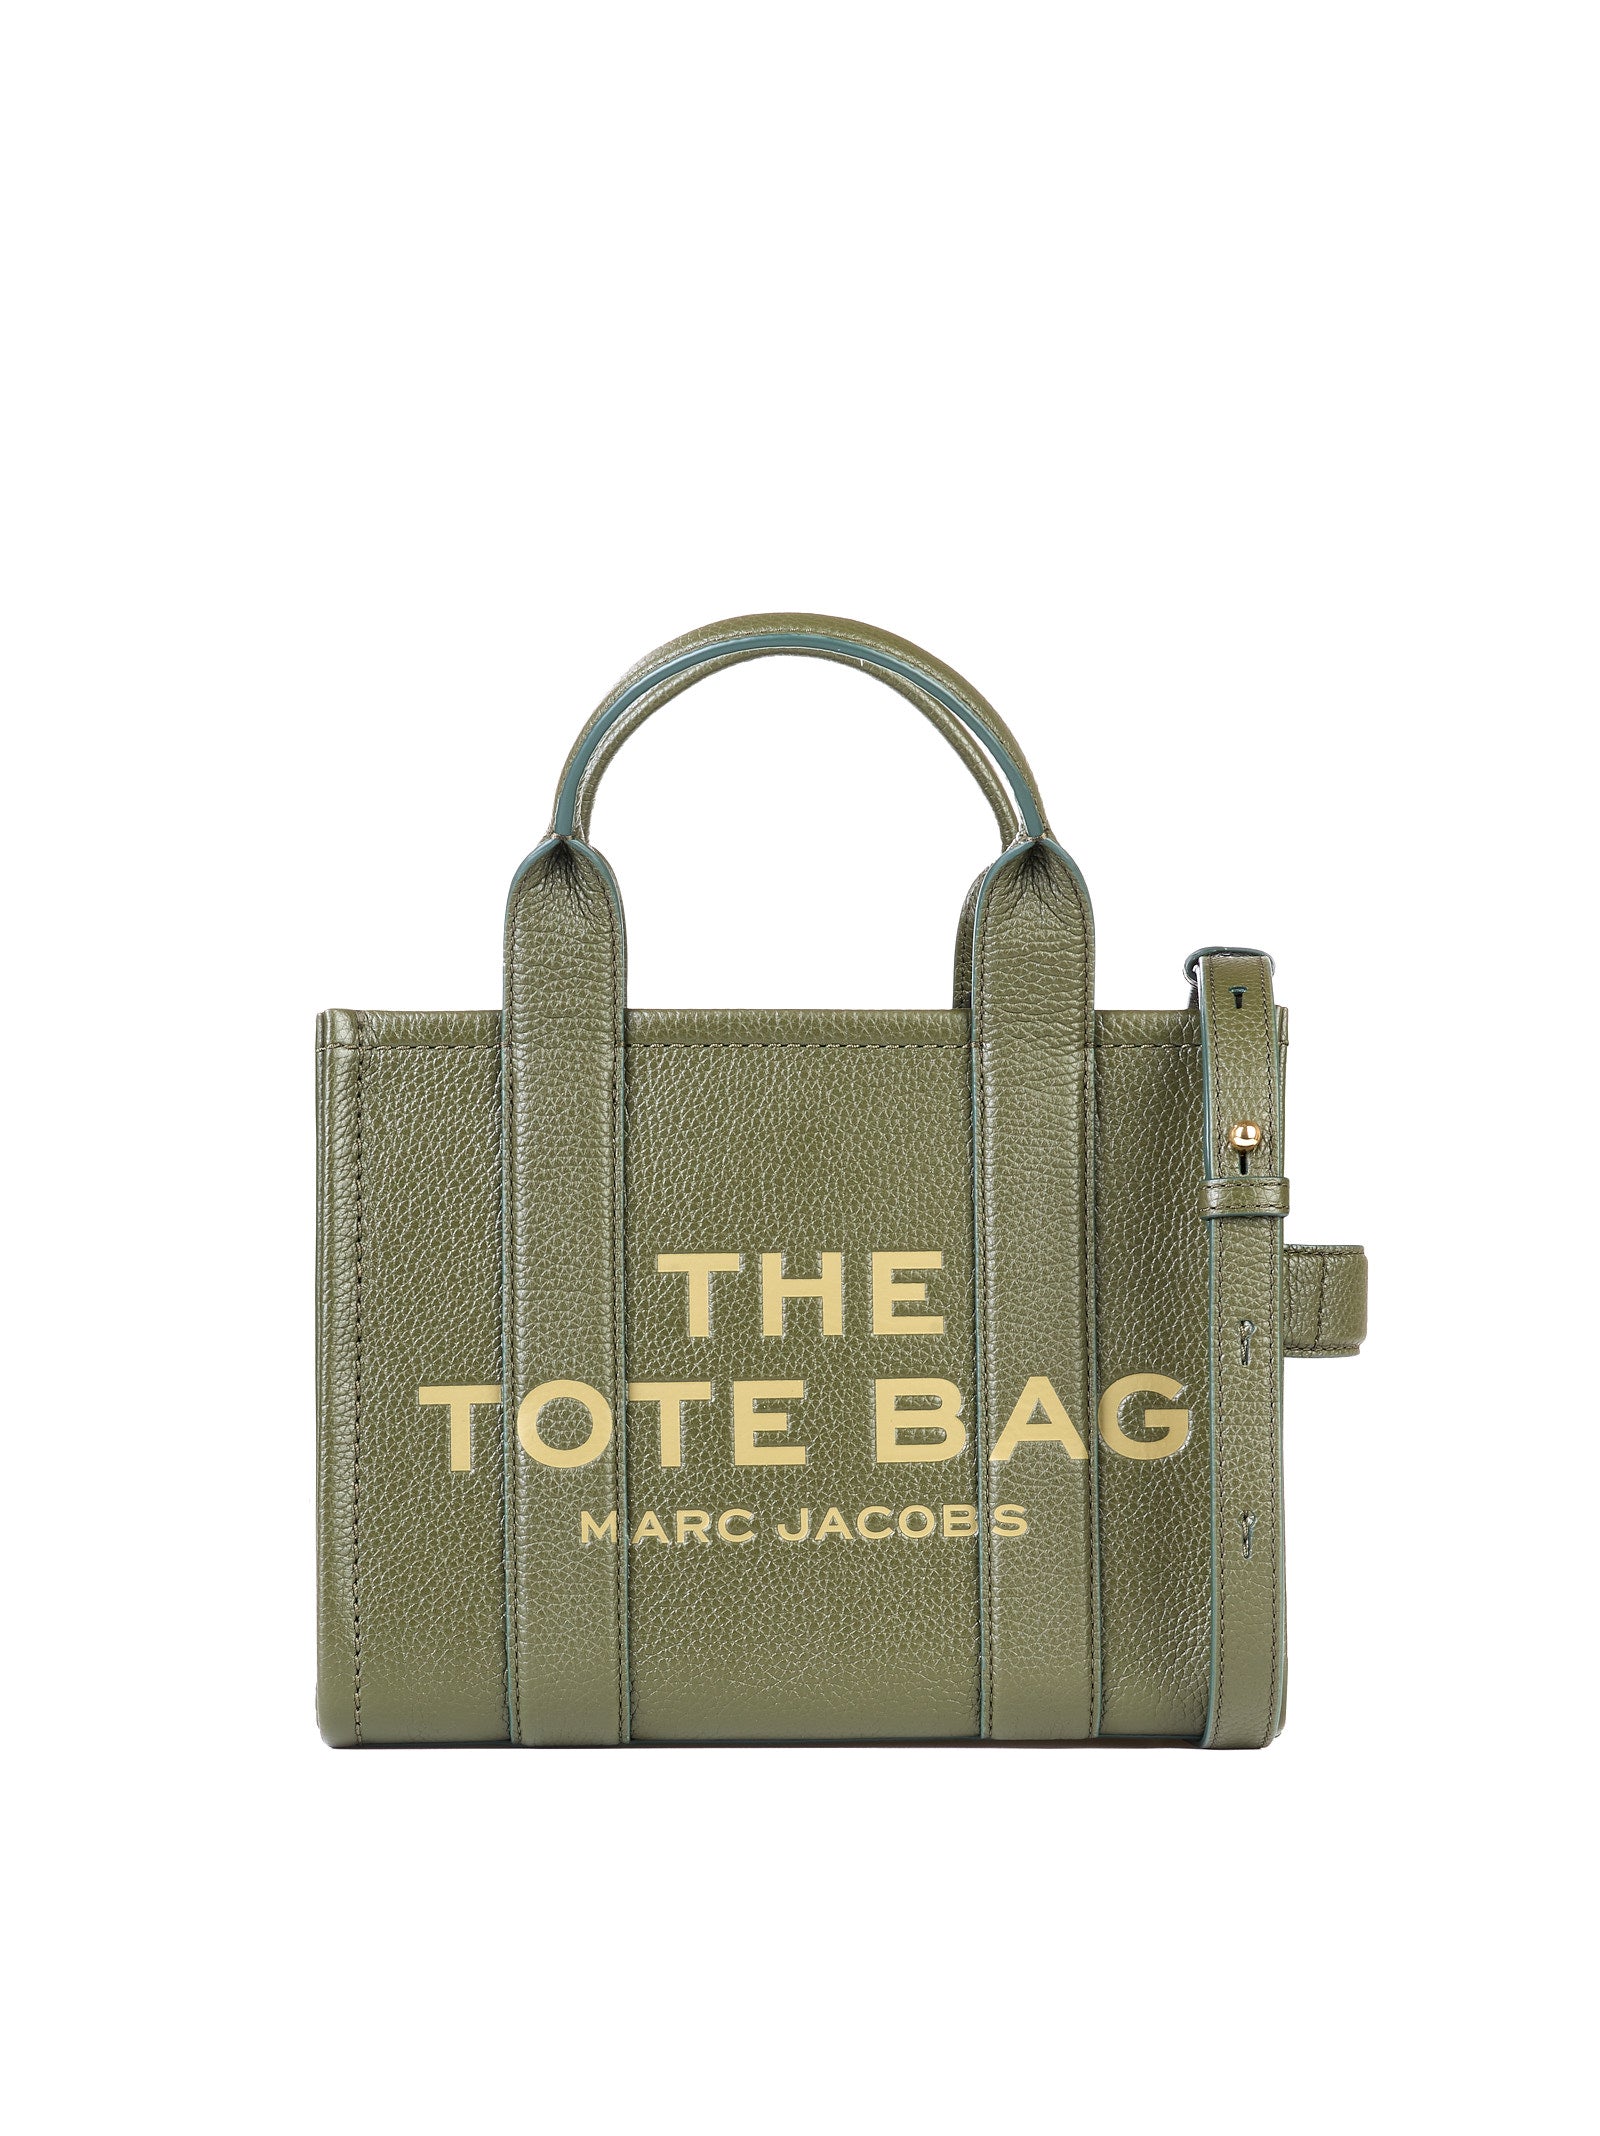 Borsa MARC JACOBS Small tote
Forest